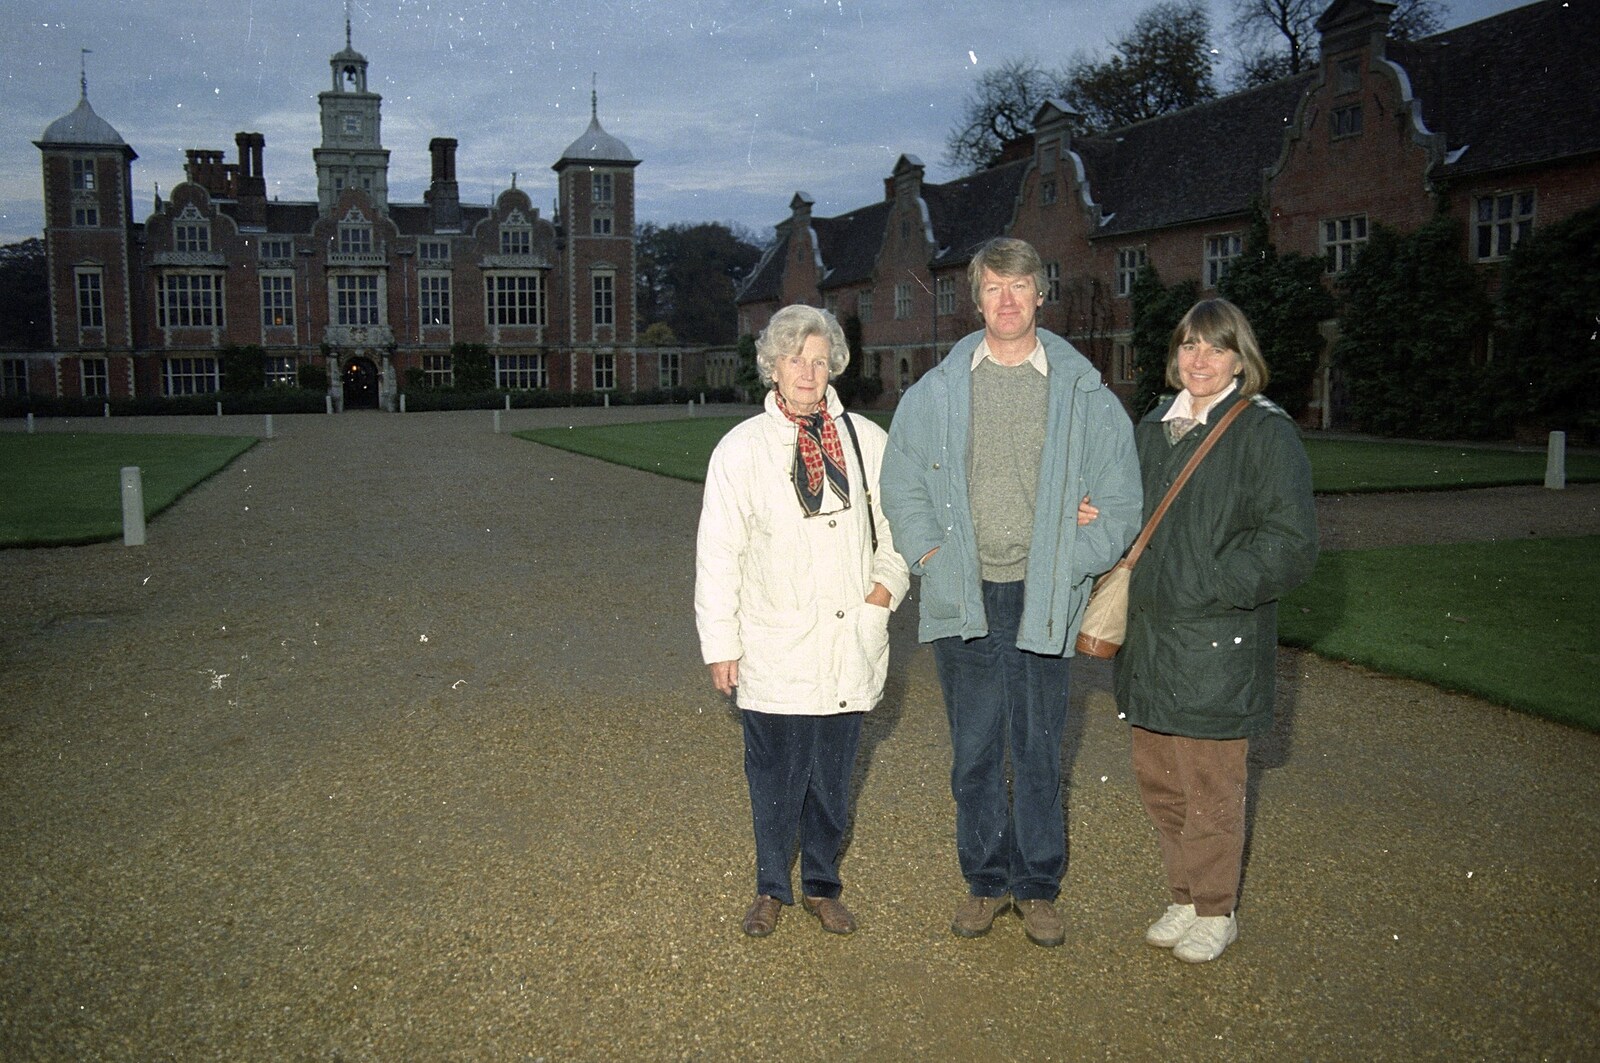 Grandmother, Neil and Caroline at Blickling  from Bernie's Anniversary and Charlie's Wedding, Palgrave and Oakley, Suffolk - 19th July 1994